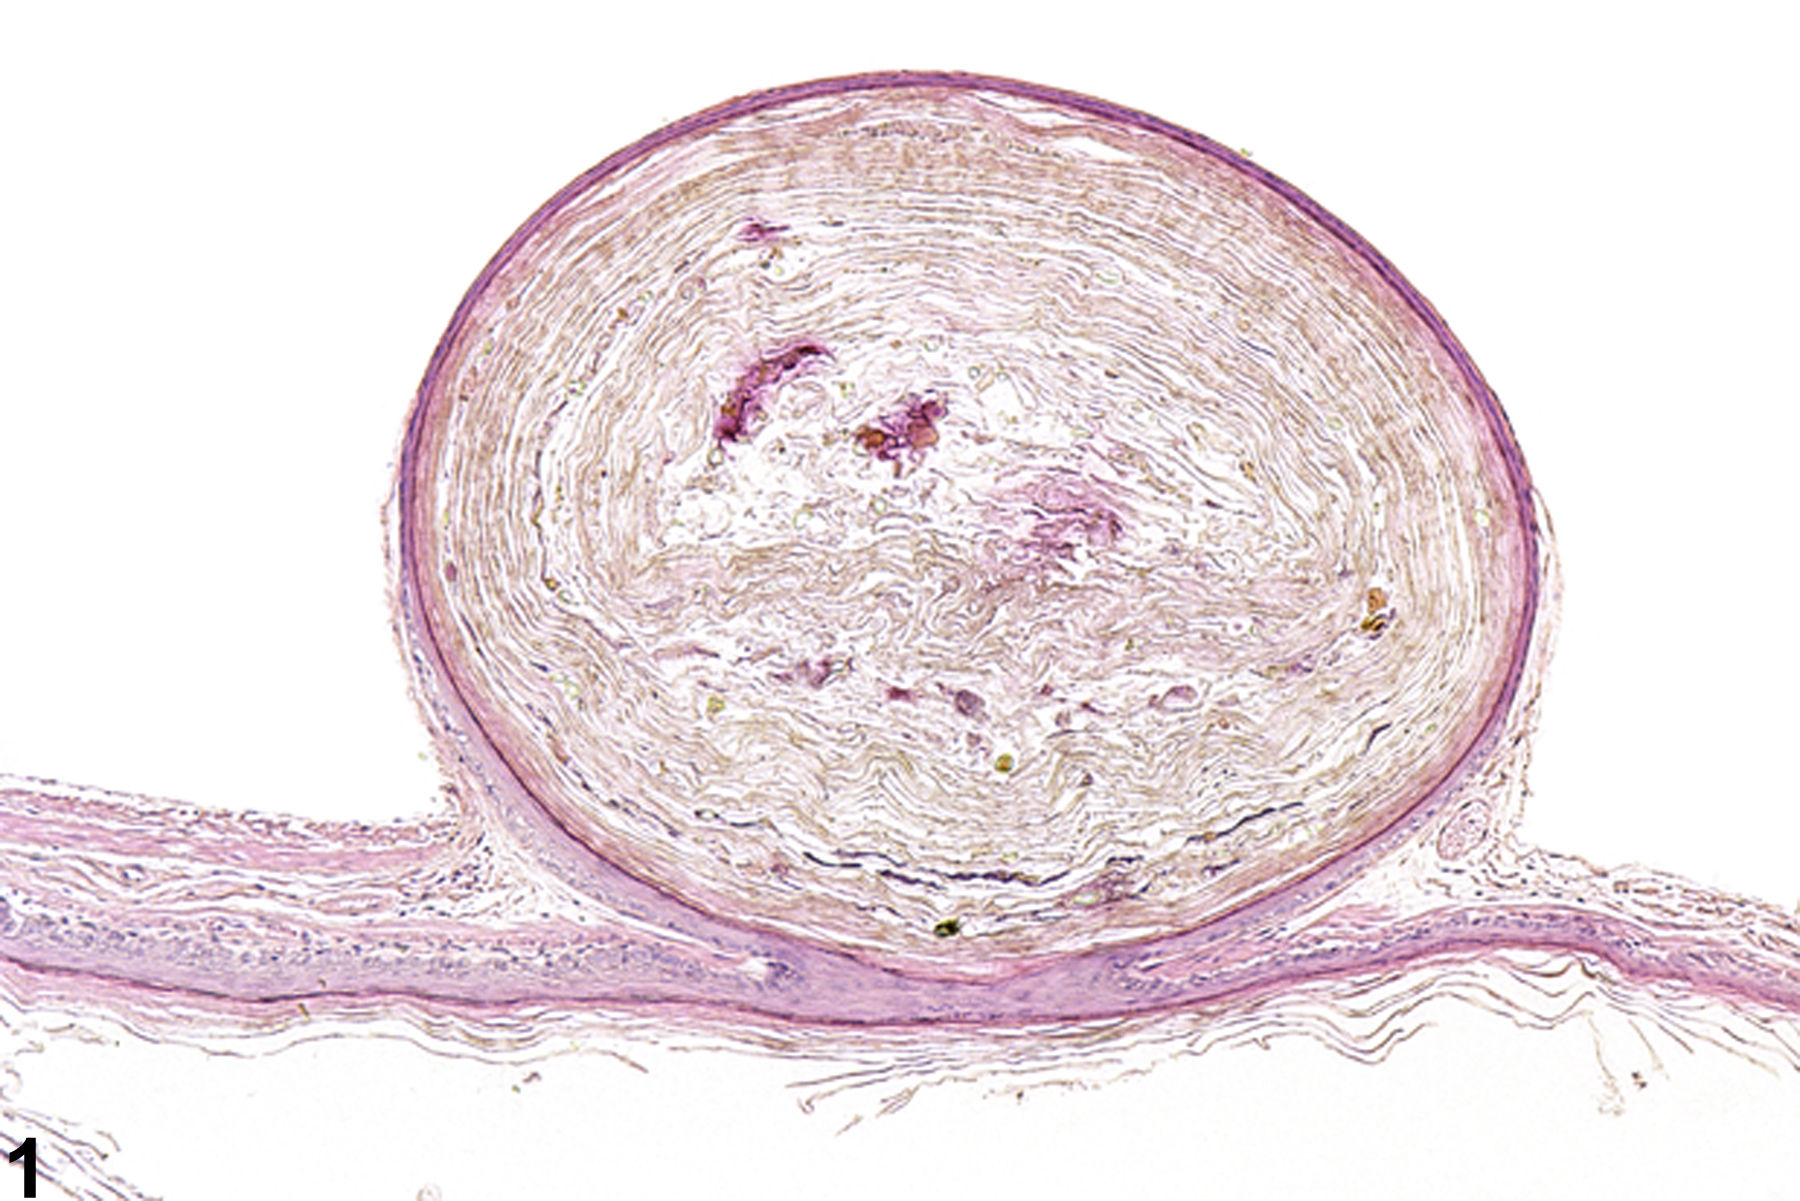 Image of cyst in the forestomach from a male B6C3F1 mouse in a chronic study